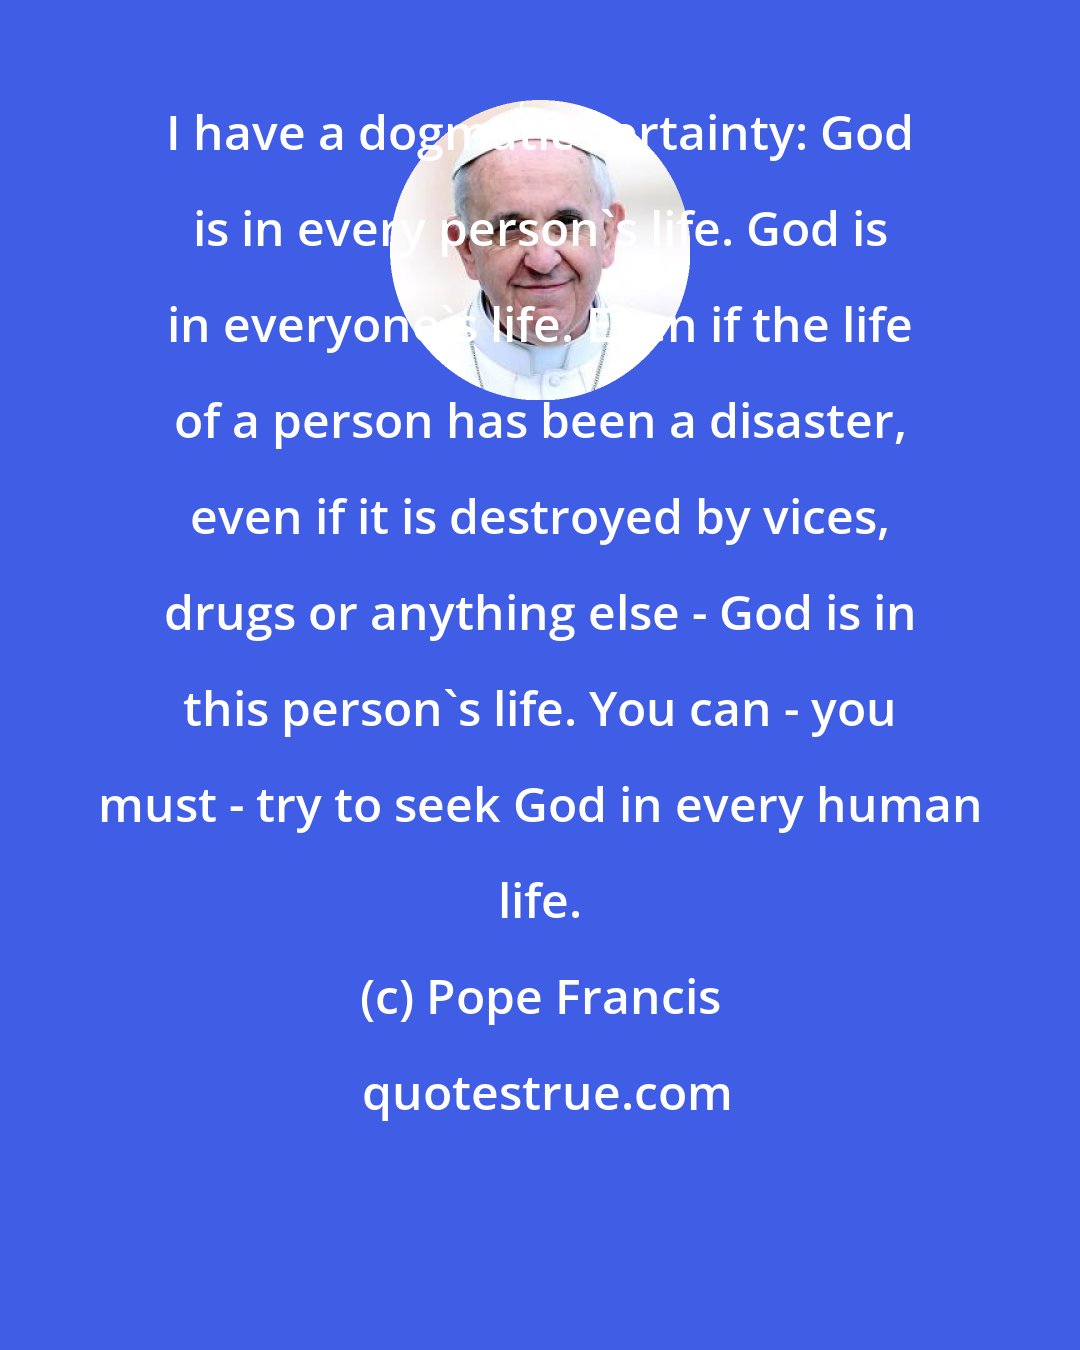 Pope Francis: I have a dogmatic certainty: God is in every person's life. God is in everyone's life. Even if the life of a person has been a disaster, even if it is destroyed by vices, drugs or anything else - God is in this person's life. You can - you must - try to seek God in every human life.